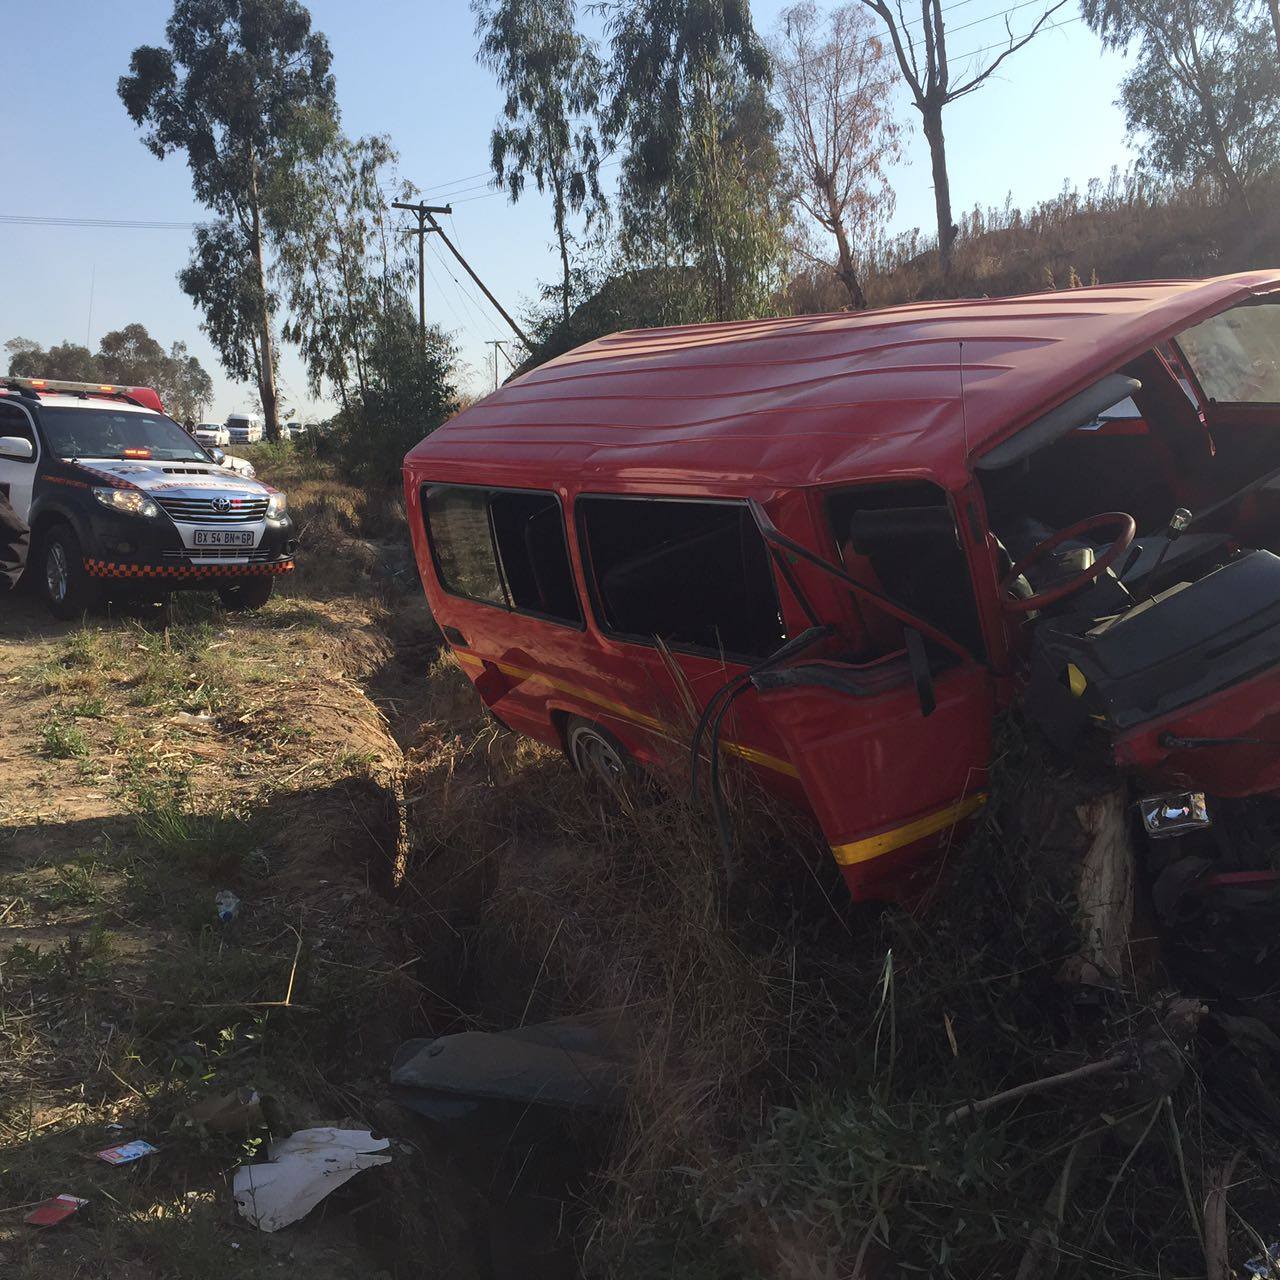 14 Injured as taxi crashes into tree on Old Pretoria Main Road, Midrand.